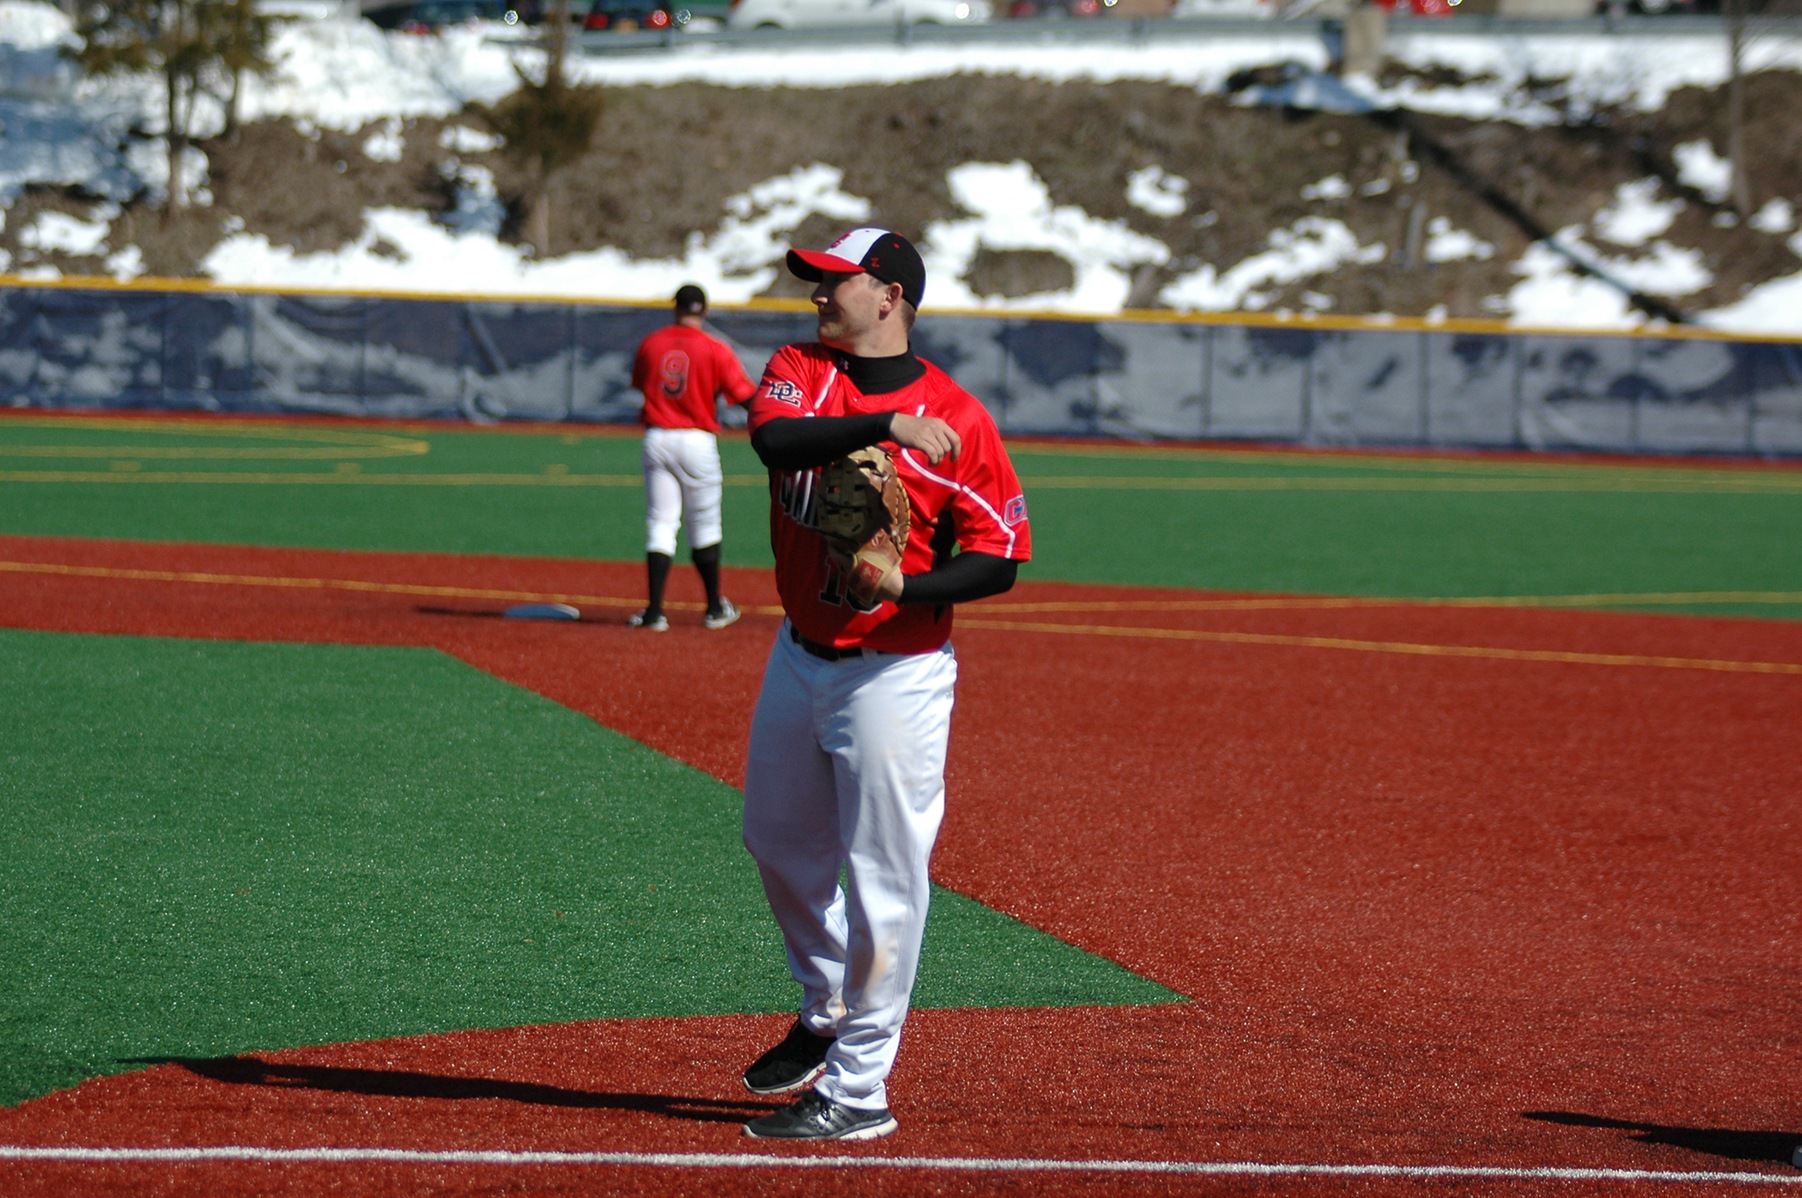 BASEBALL ERASES SIX RUN DEFICIT TO UPEND MOLLOY COLLEGE